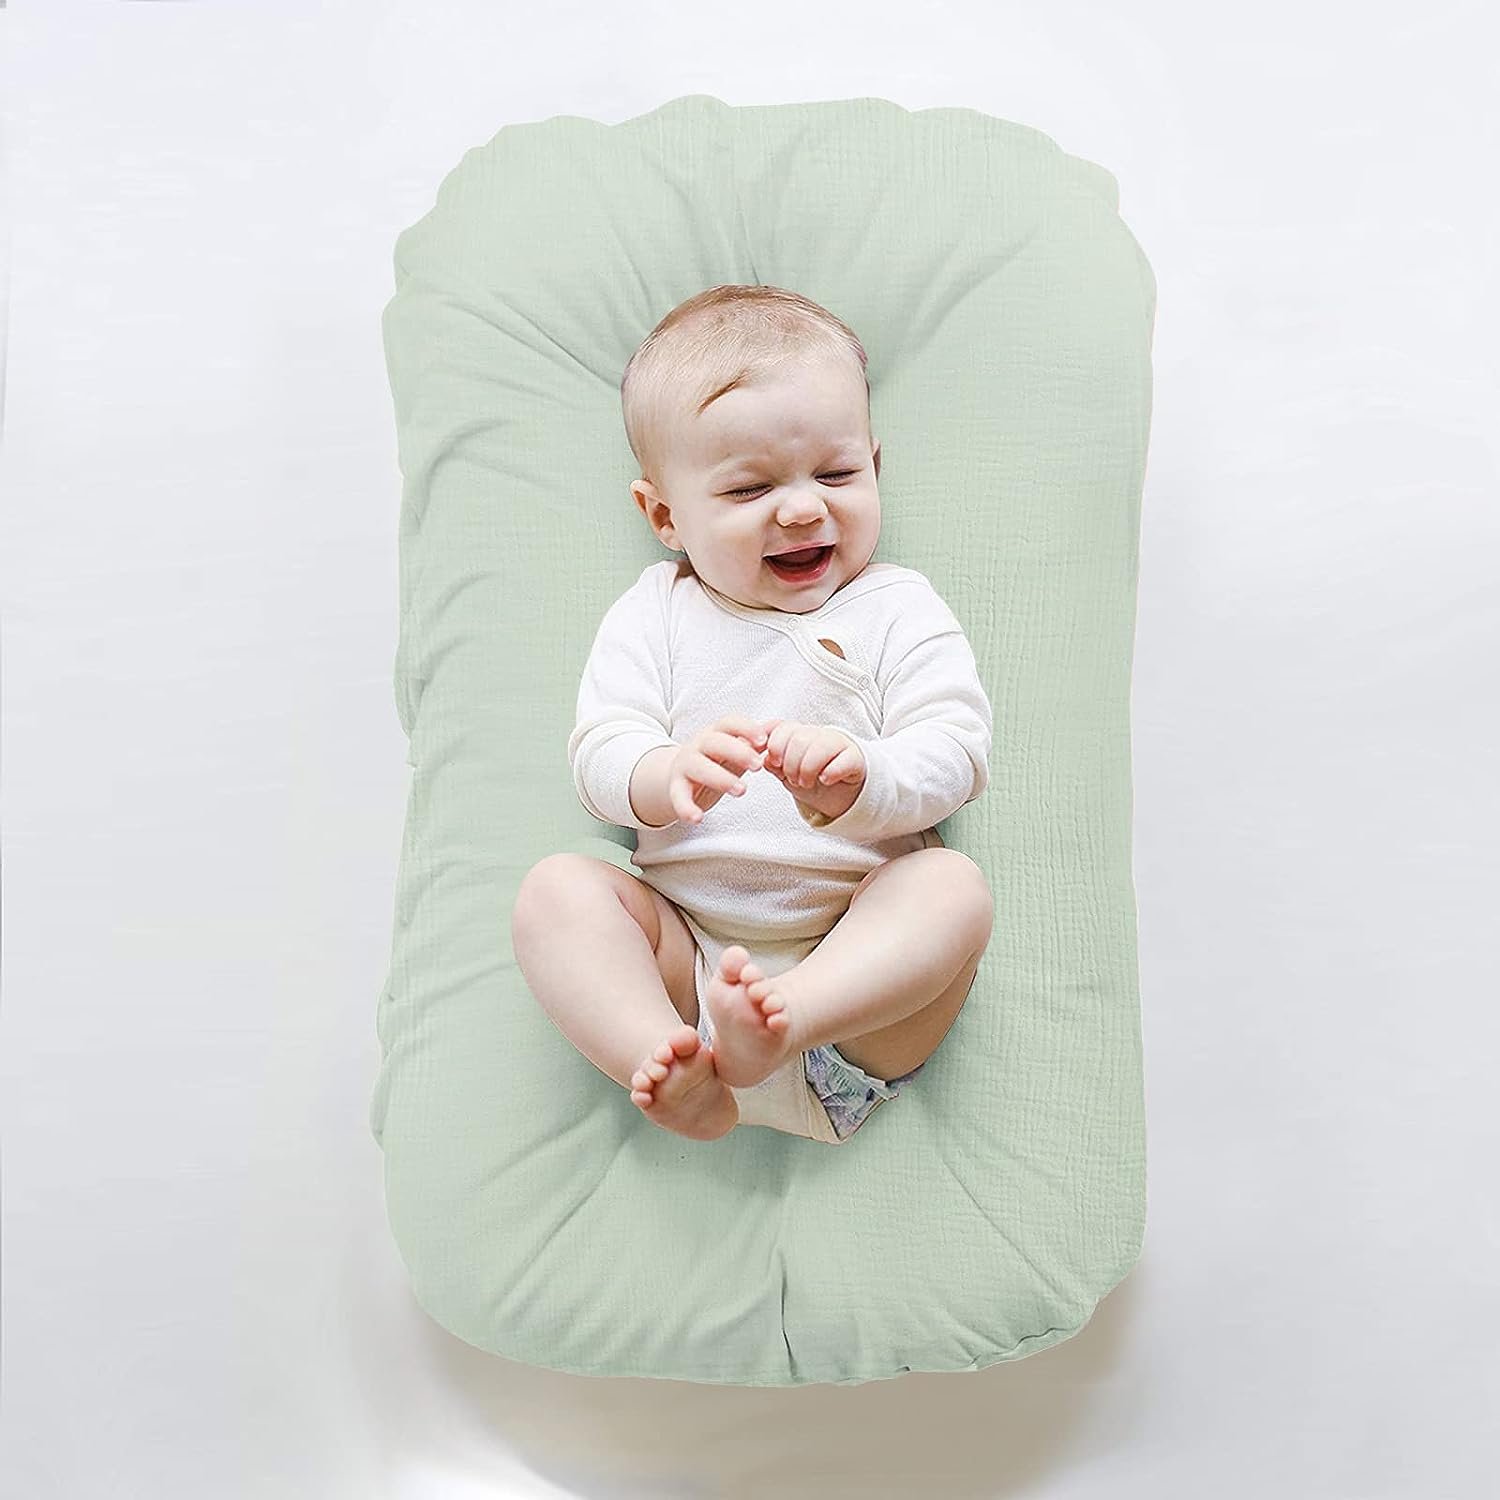 ZonLi Baby Lounger Review